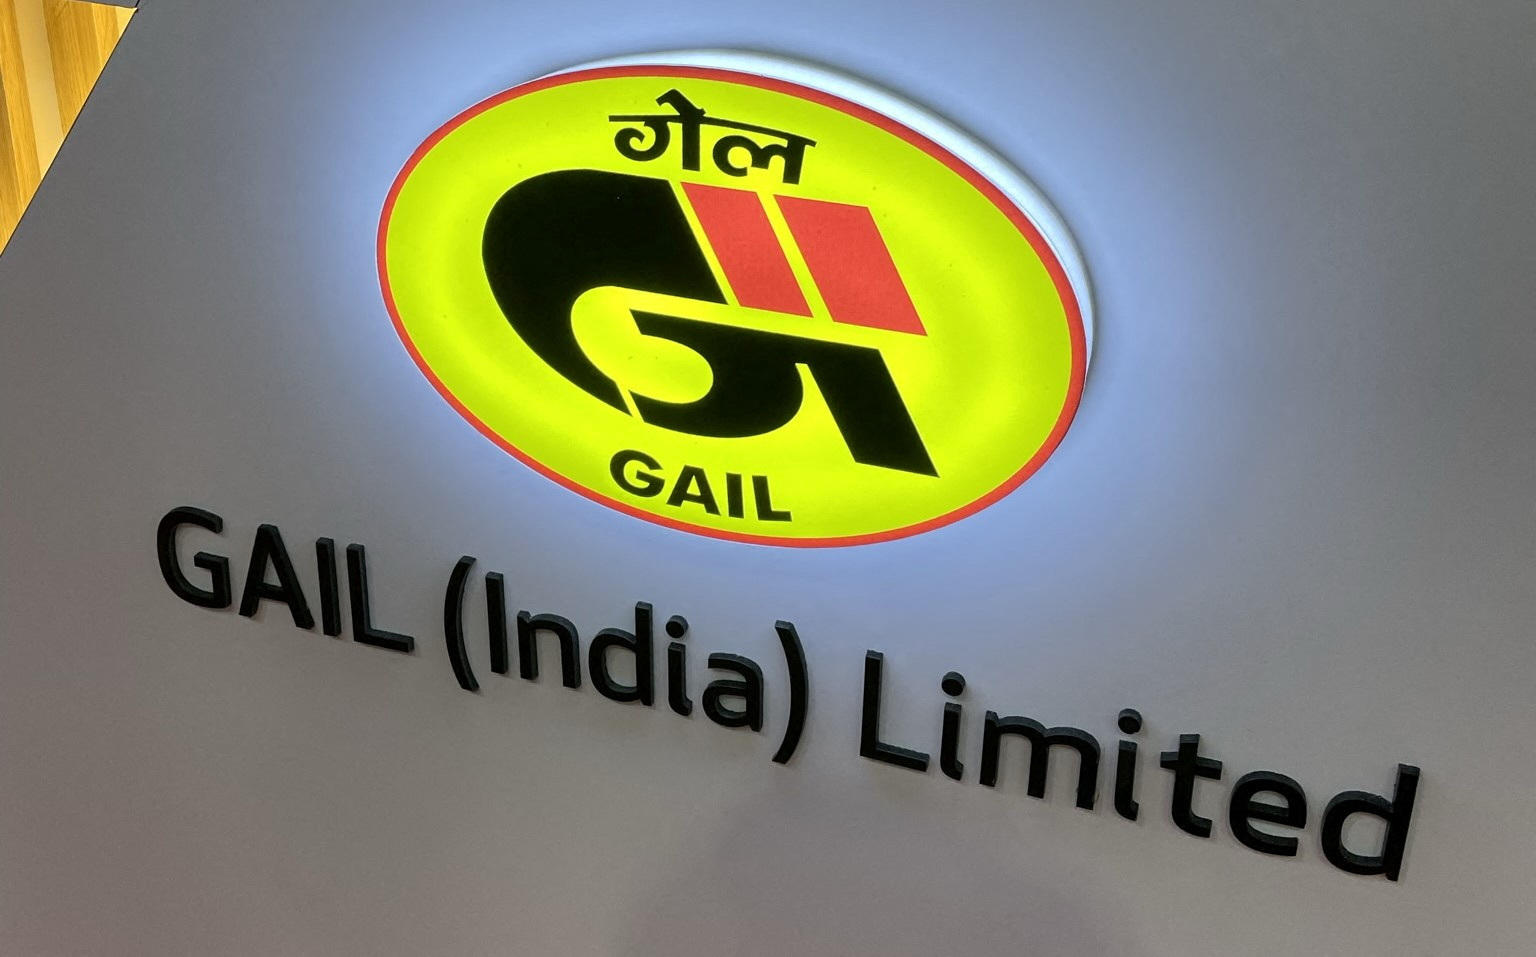 GAIL (India) Ltd. Commissions India's First Green Hydrogen Plant